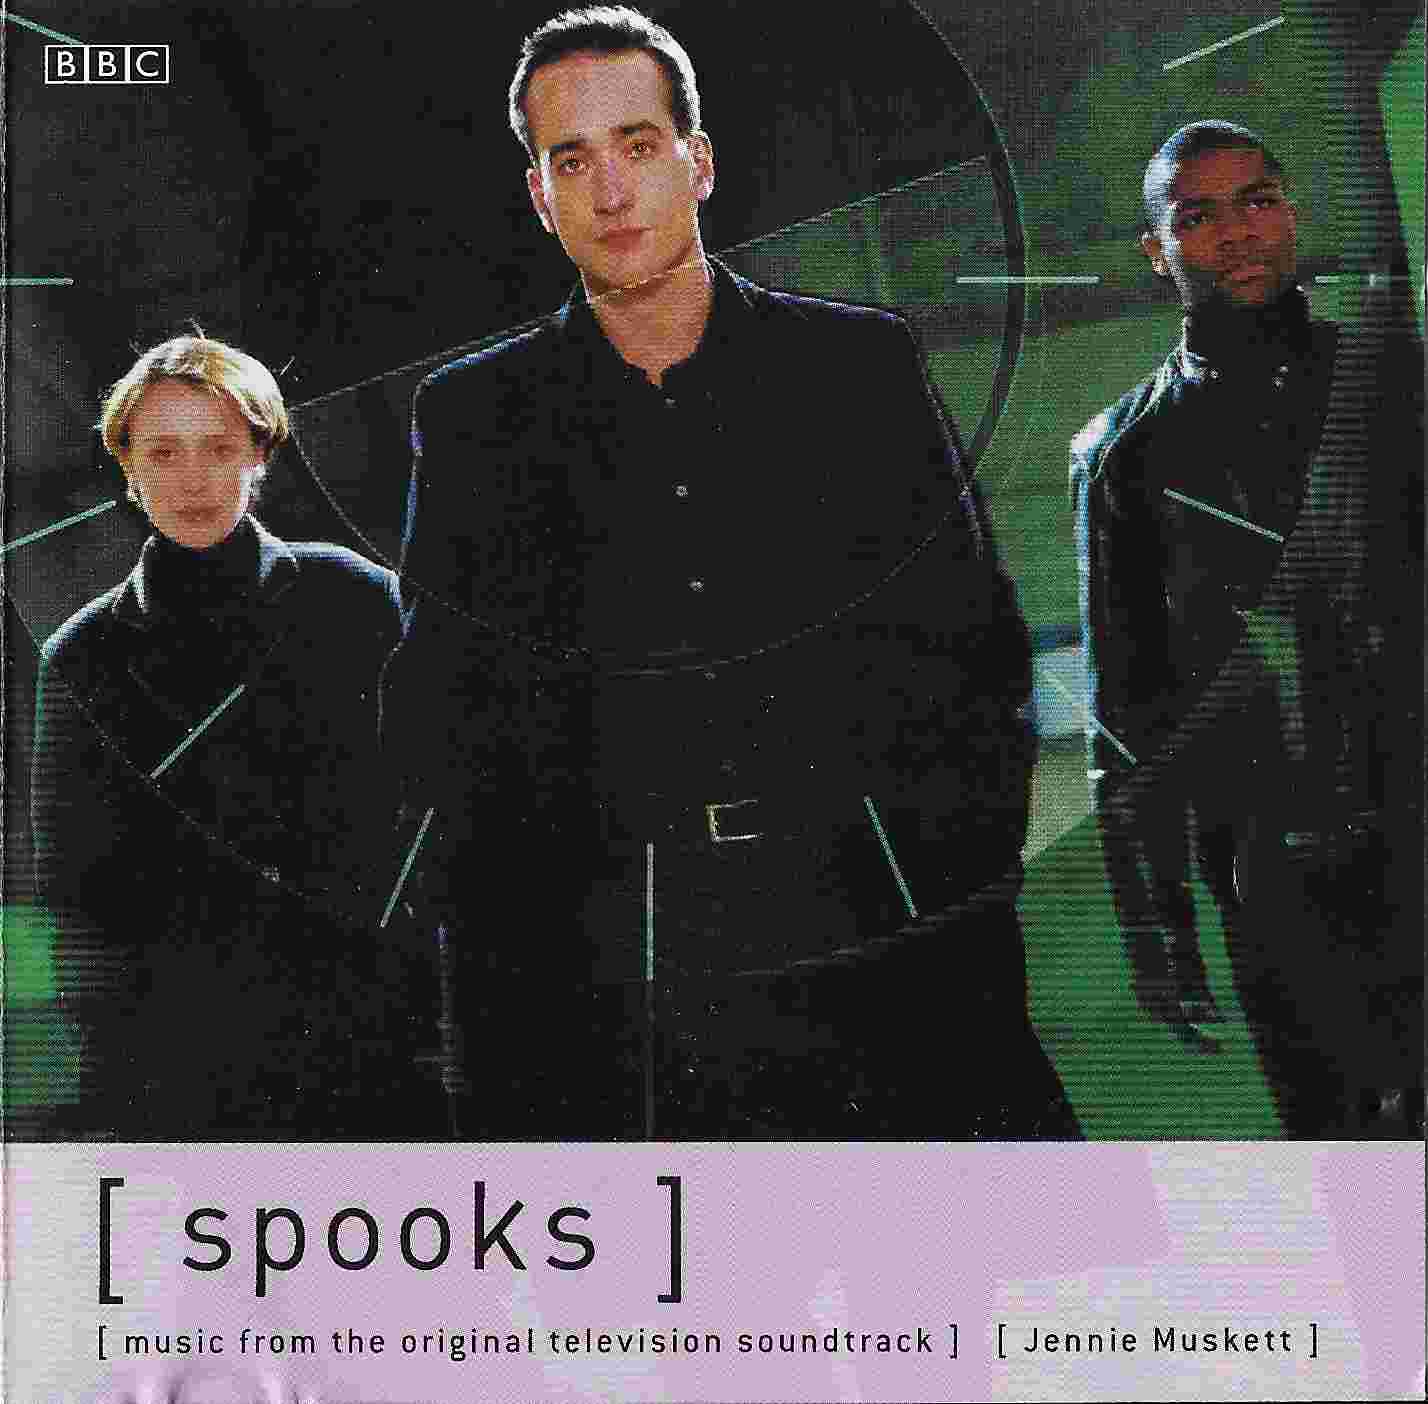 Picture of FLYCUB20105 [ spooks ] Music from the original television soundtrack by artist Jennie Muskett from the BBC cds - Records and Tapes library